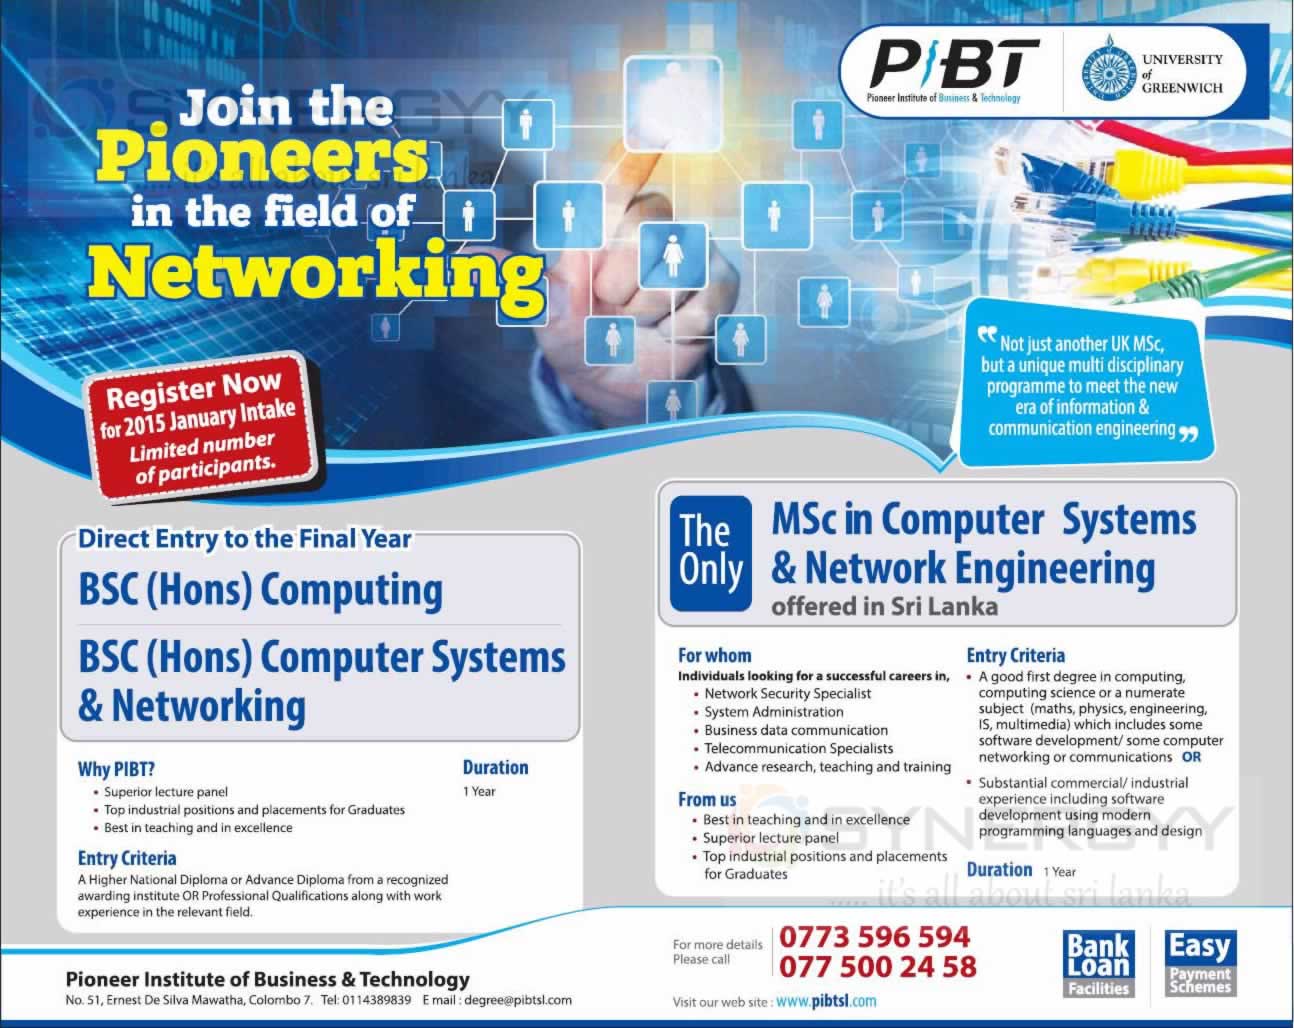 PIBT B.Sc and M.Sc Degree programme - Application calls for new intakes